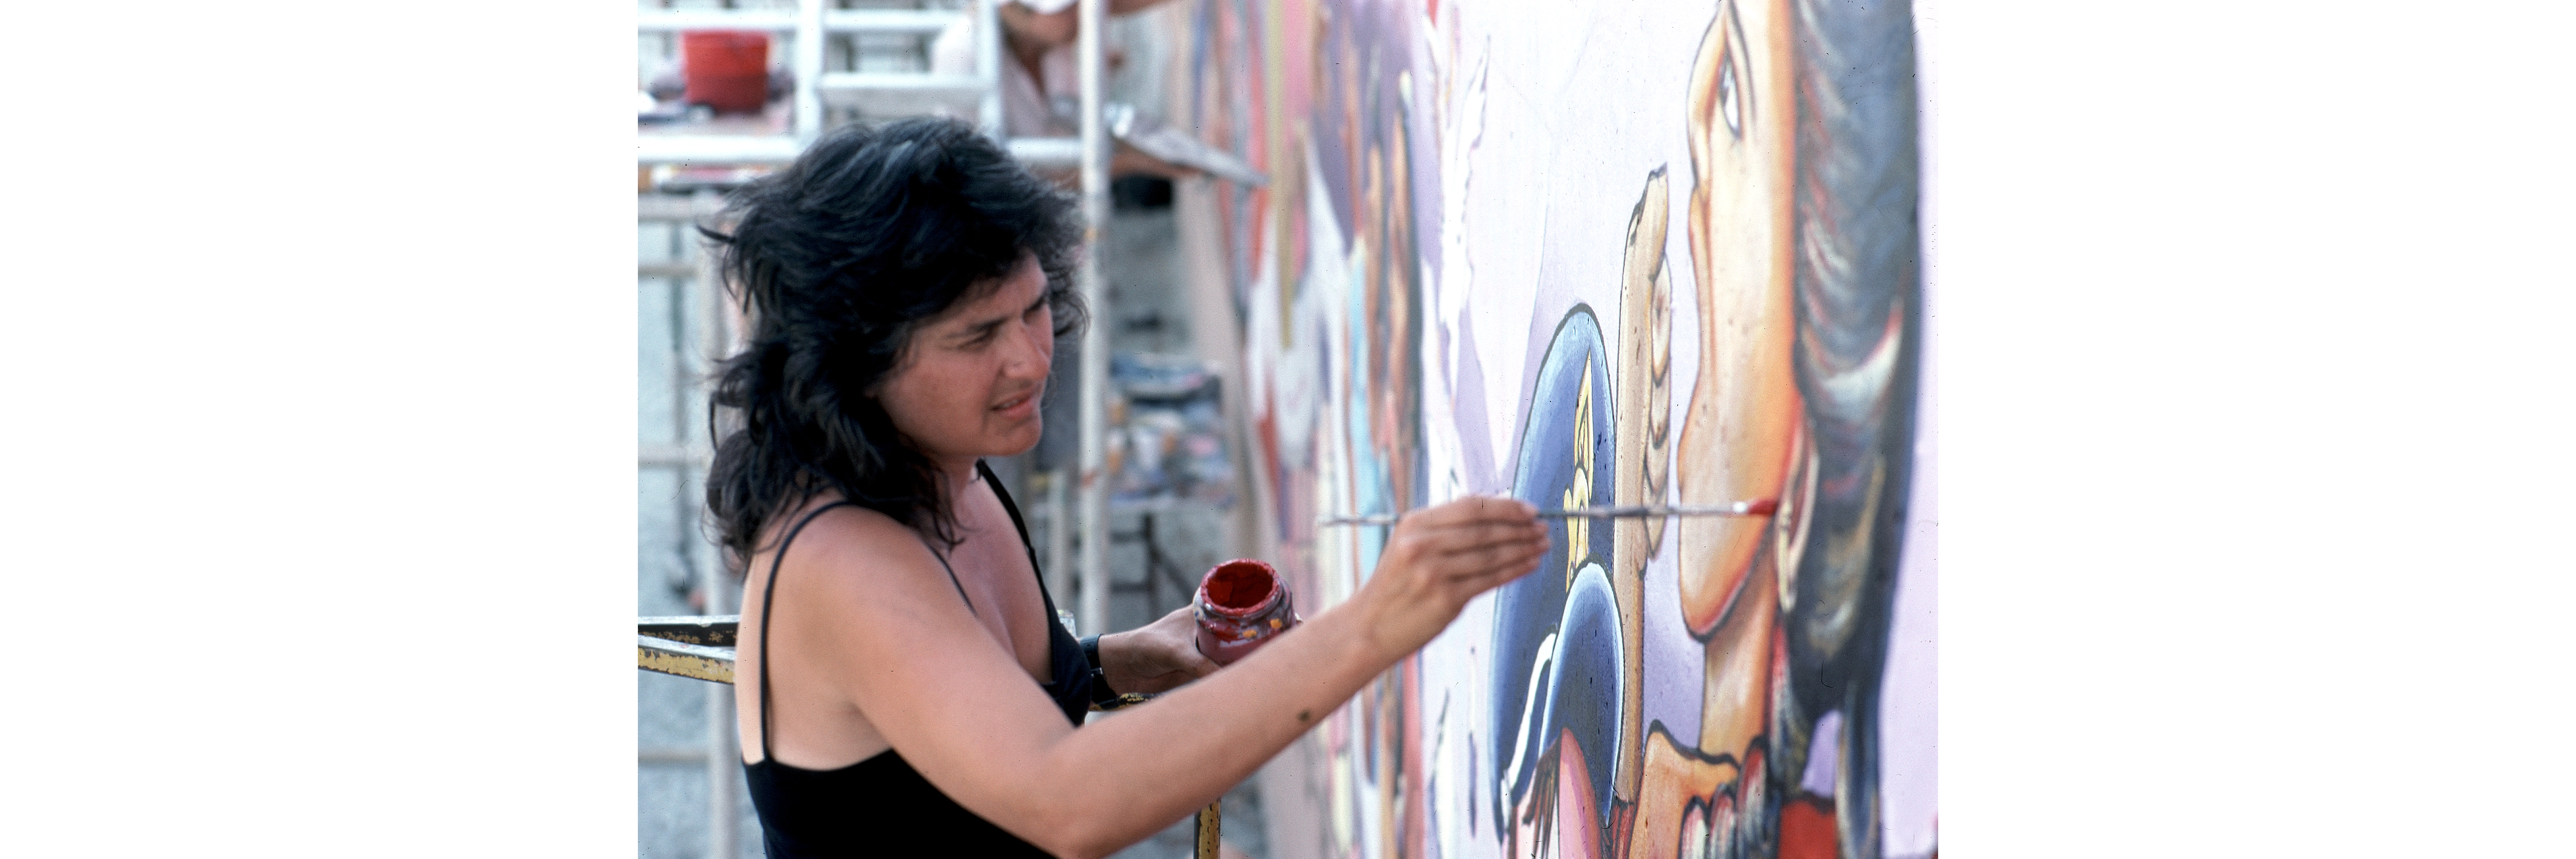 Judy Baca painting The Great Wall of Los Angeles, summer of 1983, photo courtesy of the SPARC Archives (SPARCinLA.org)